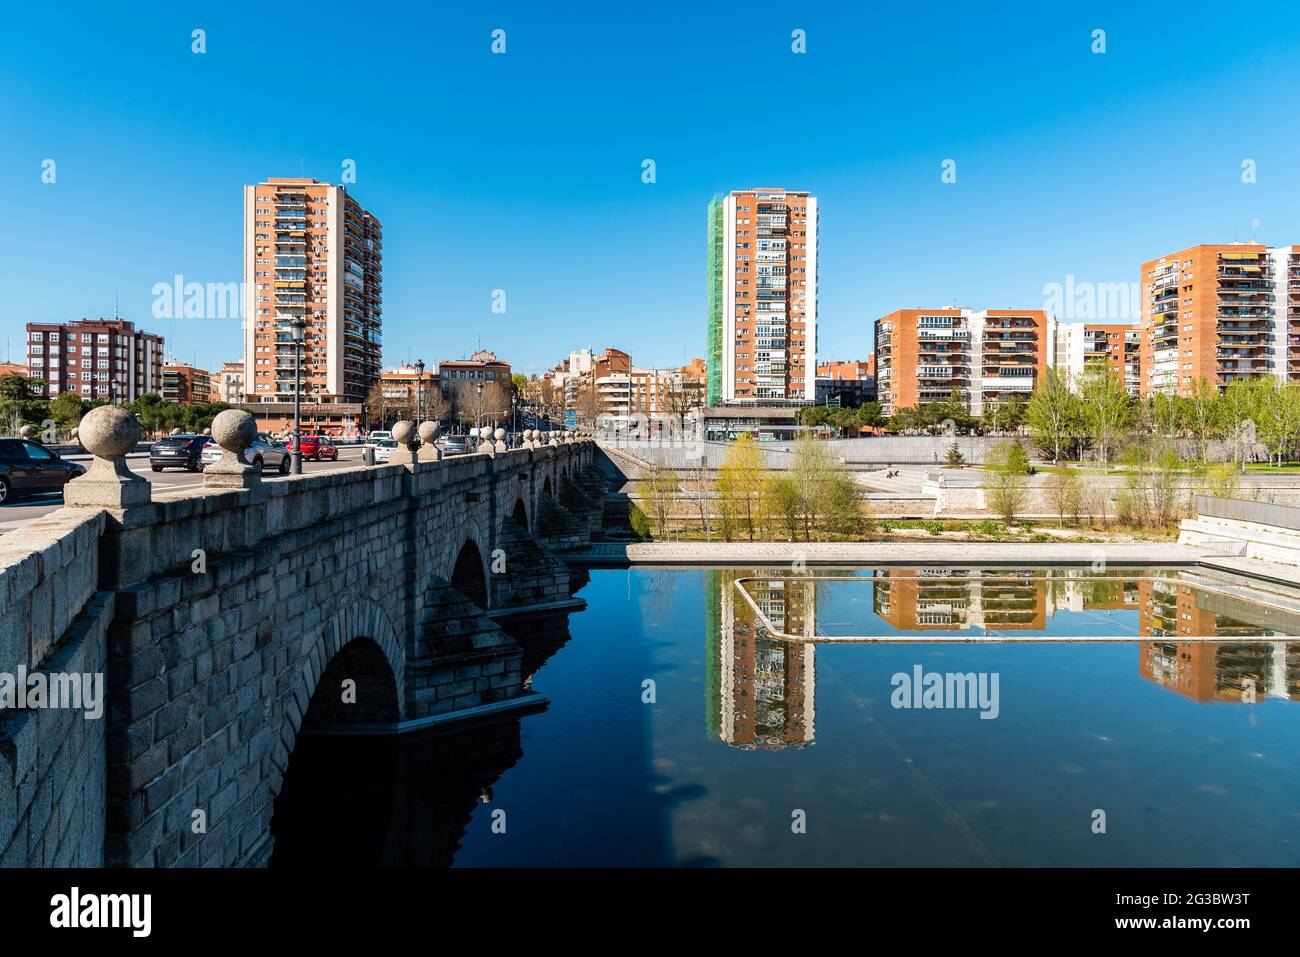 Madrid, Spain - March 14, 2021: Madrid Rio. Bridge of Segovia and Puerta del Angel quarter. Reflections of residential towers on water Stock Photo